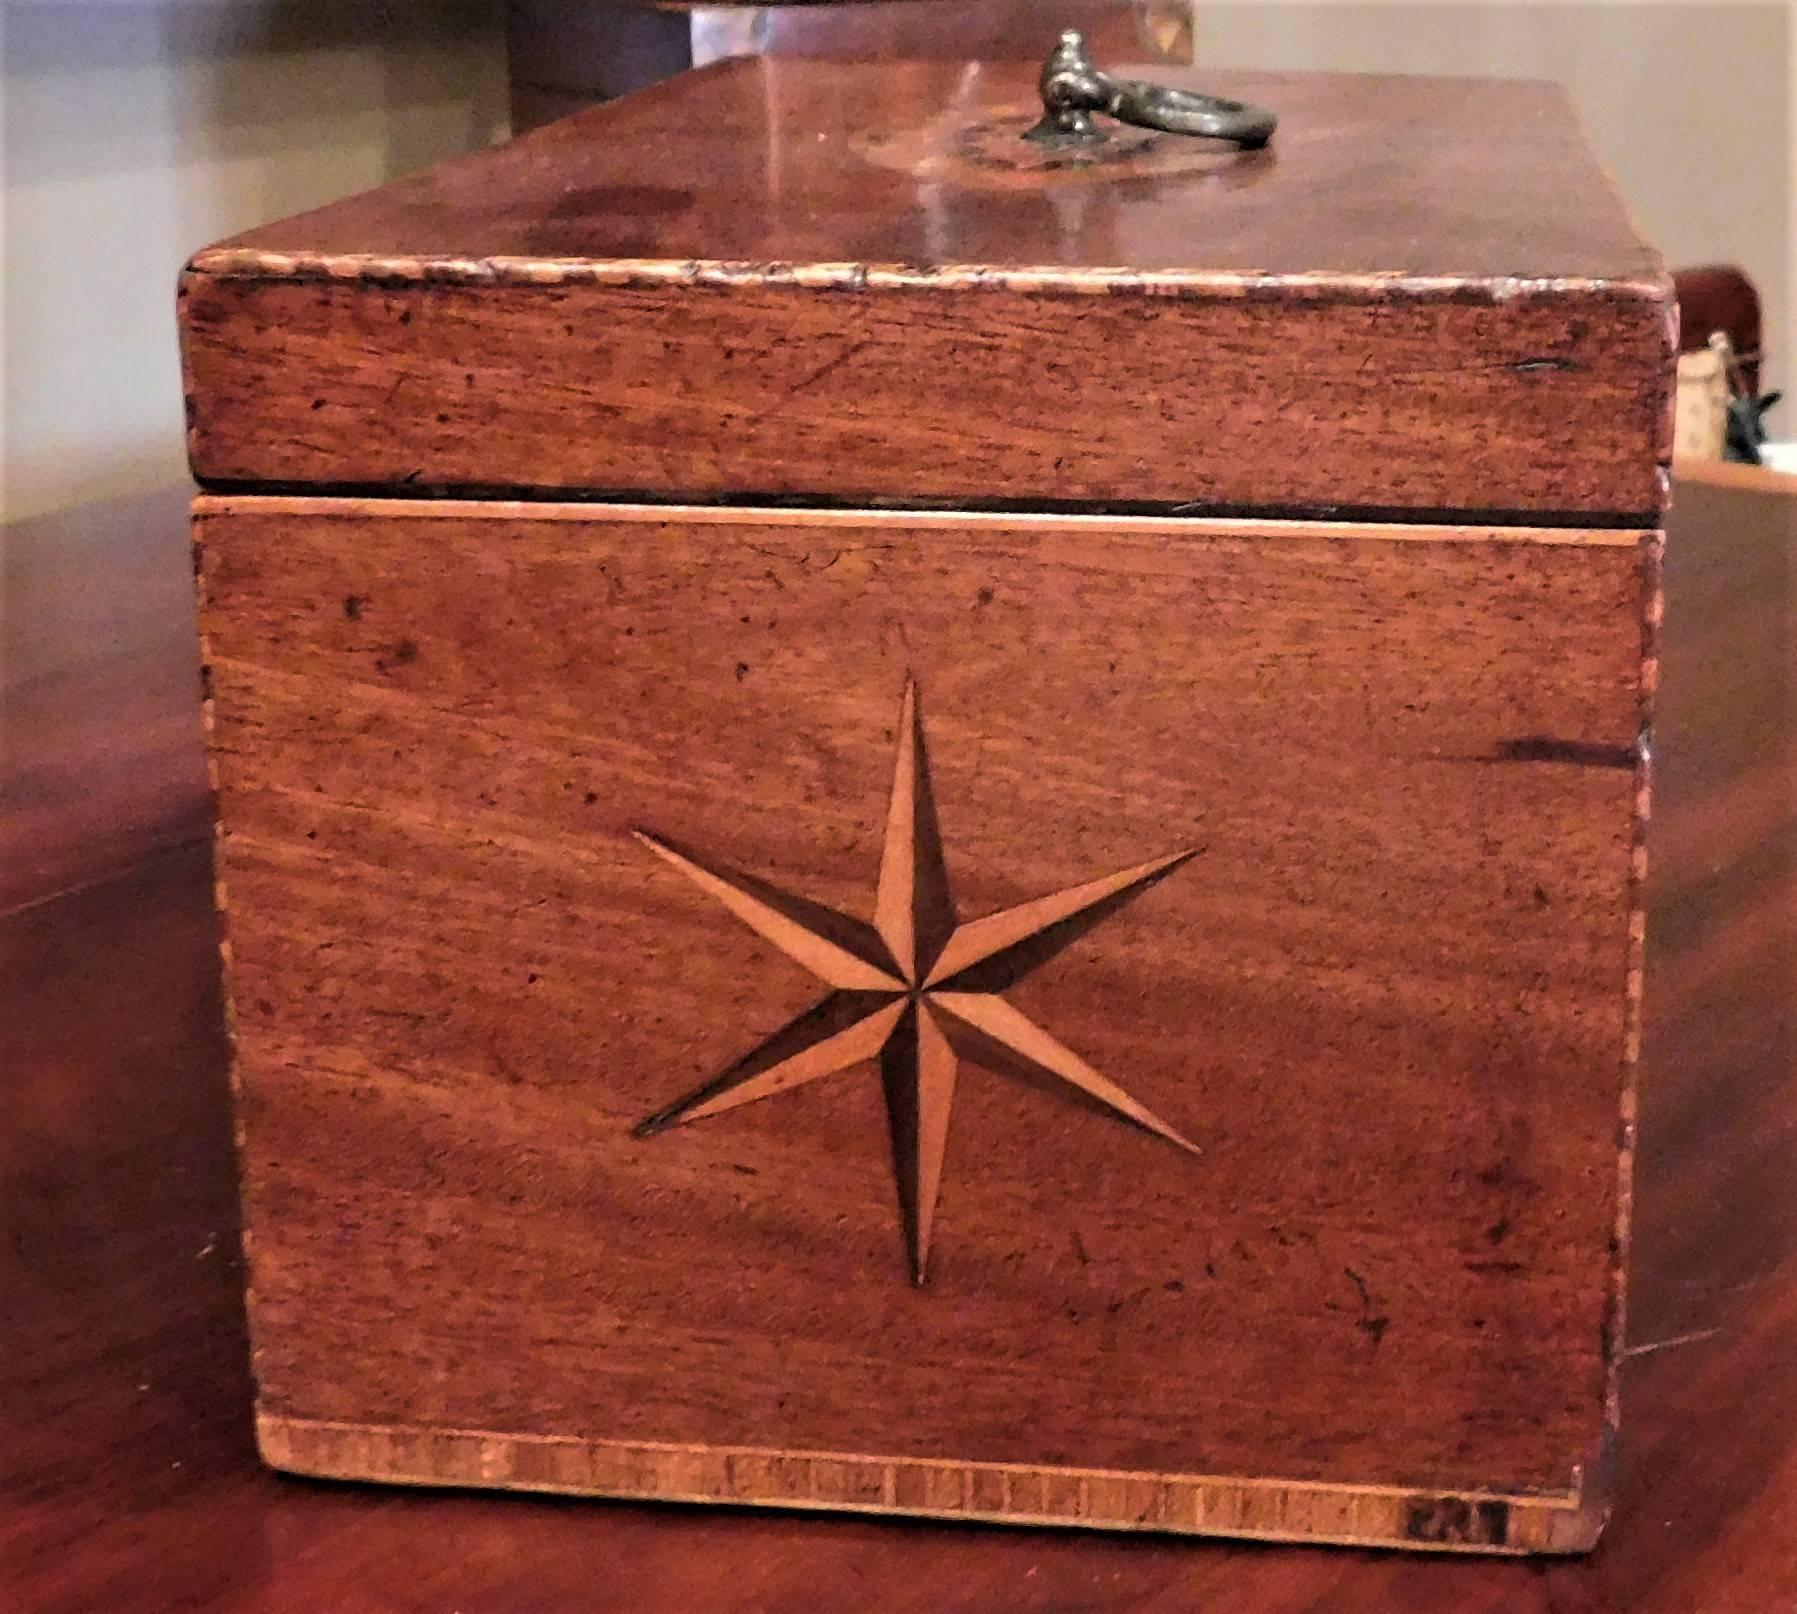 This small Hepplewhite tea caddy has star and eye inlays of harewood and satinwood. It has two compartments with removable zinc boxes, one of which has a lid. The box also has a key and an original brass pull on top. The lid is lined with wool baize.